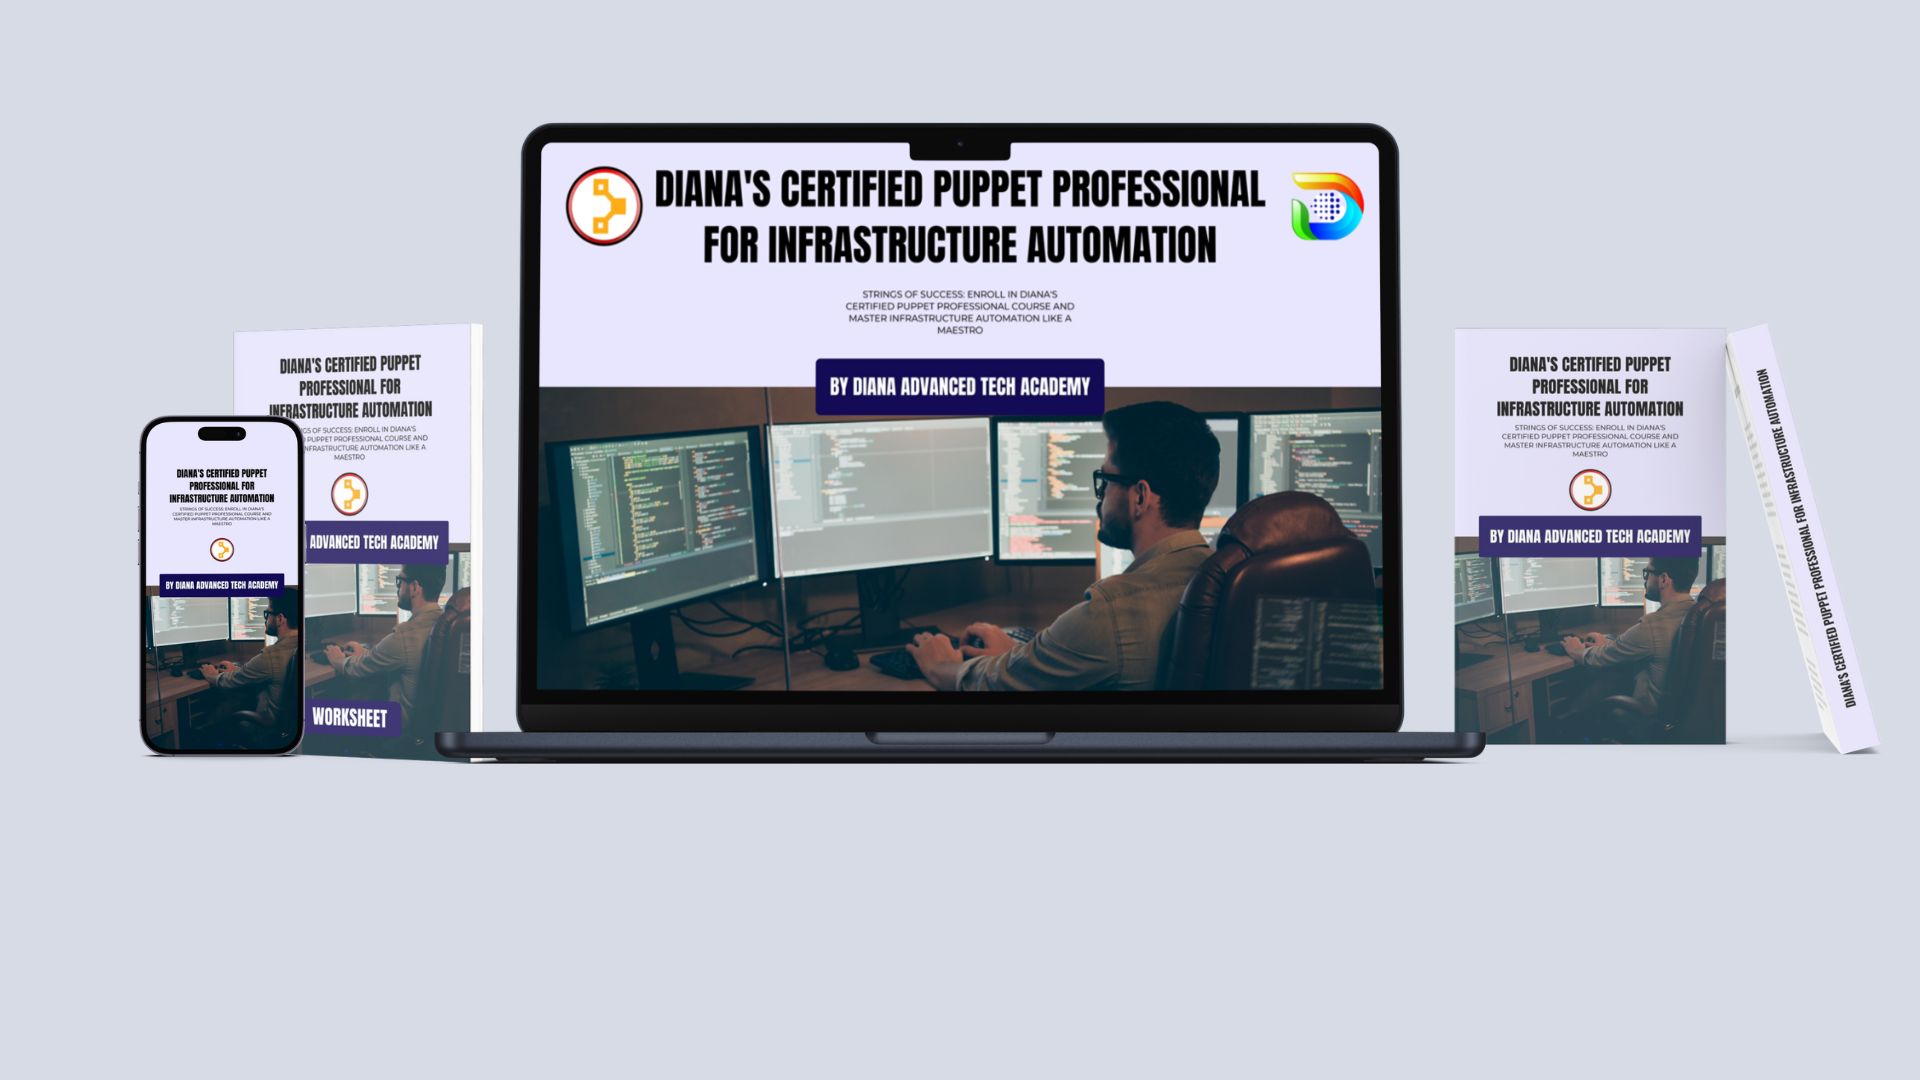 Diana Certified Puppet Professional for Infrastructure Automation